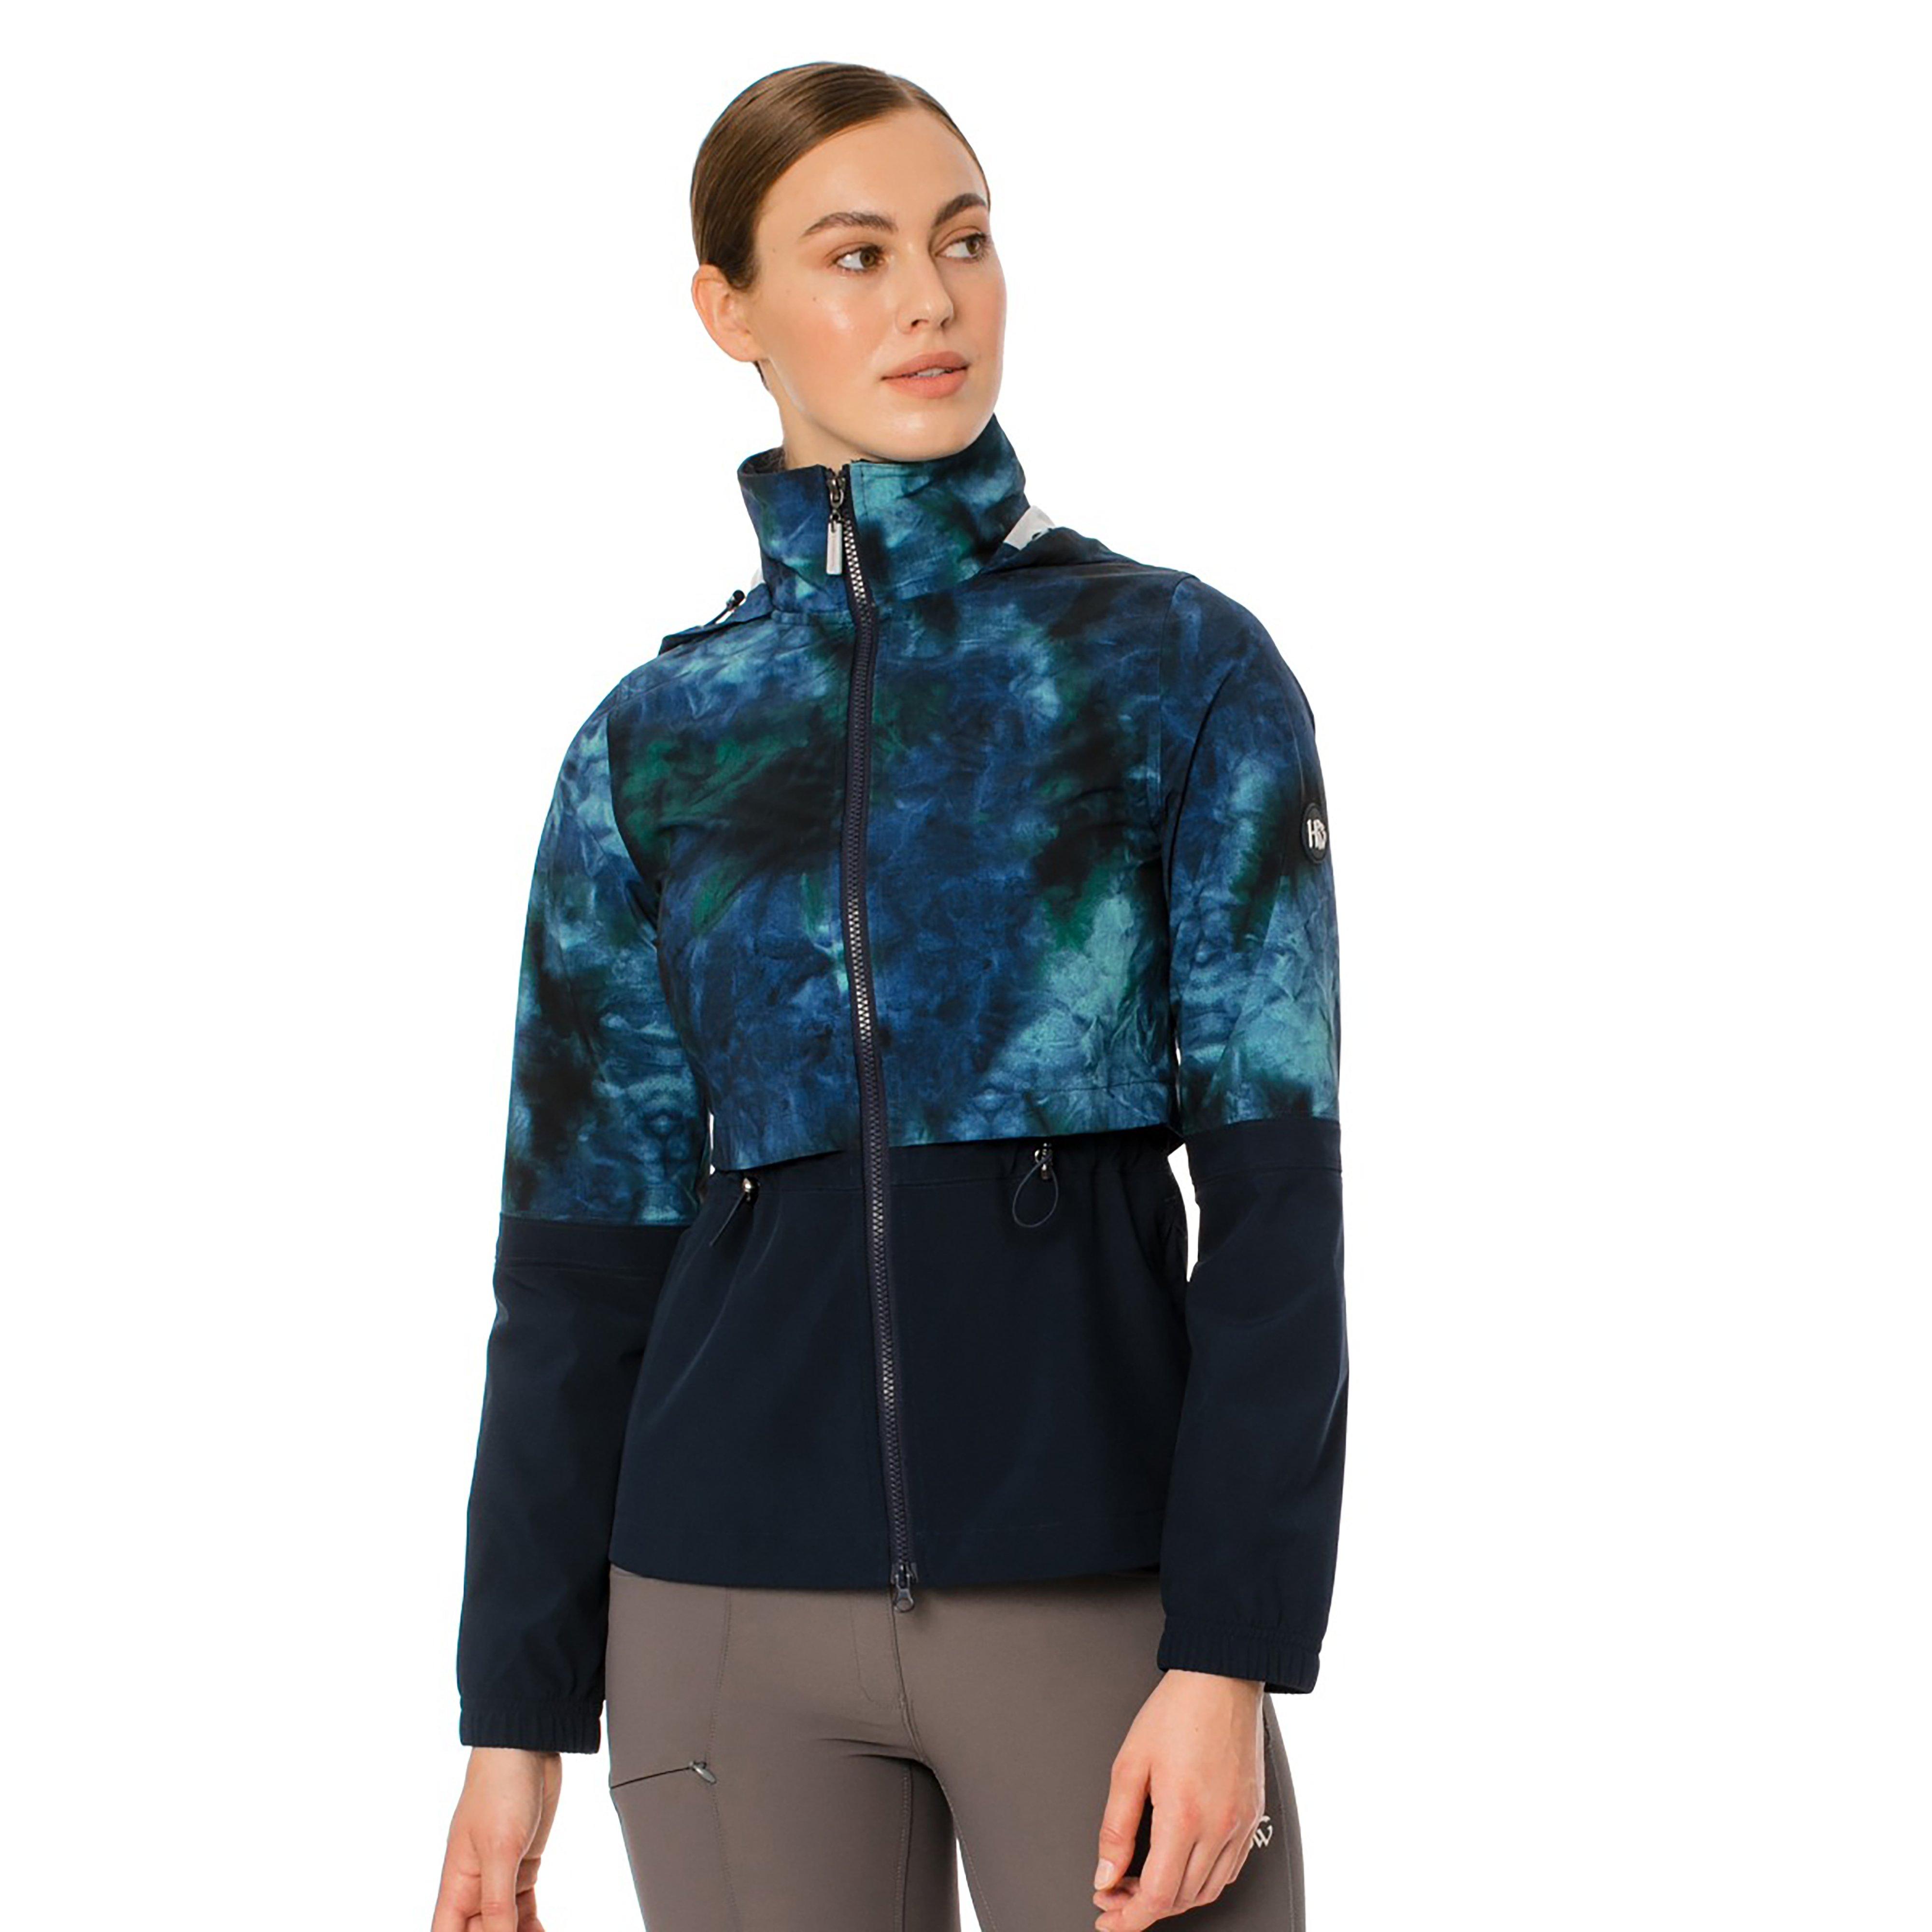 Horseware Ladies Carrie Riding Jacket Green/Navy Tie Dyed